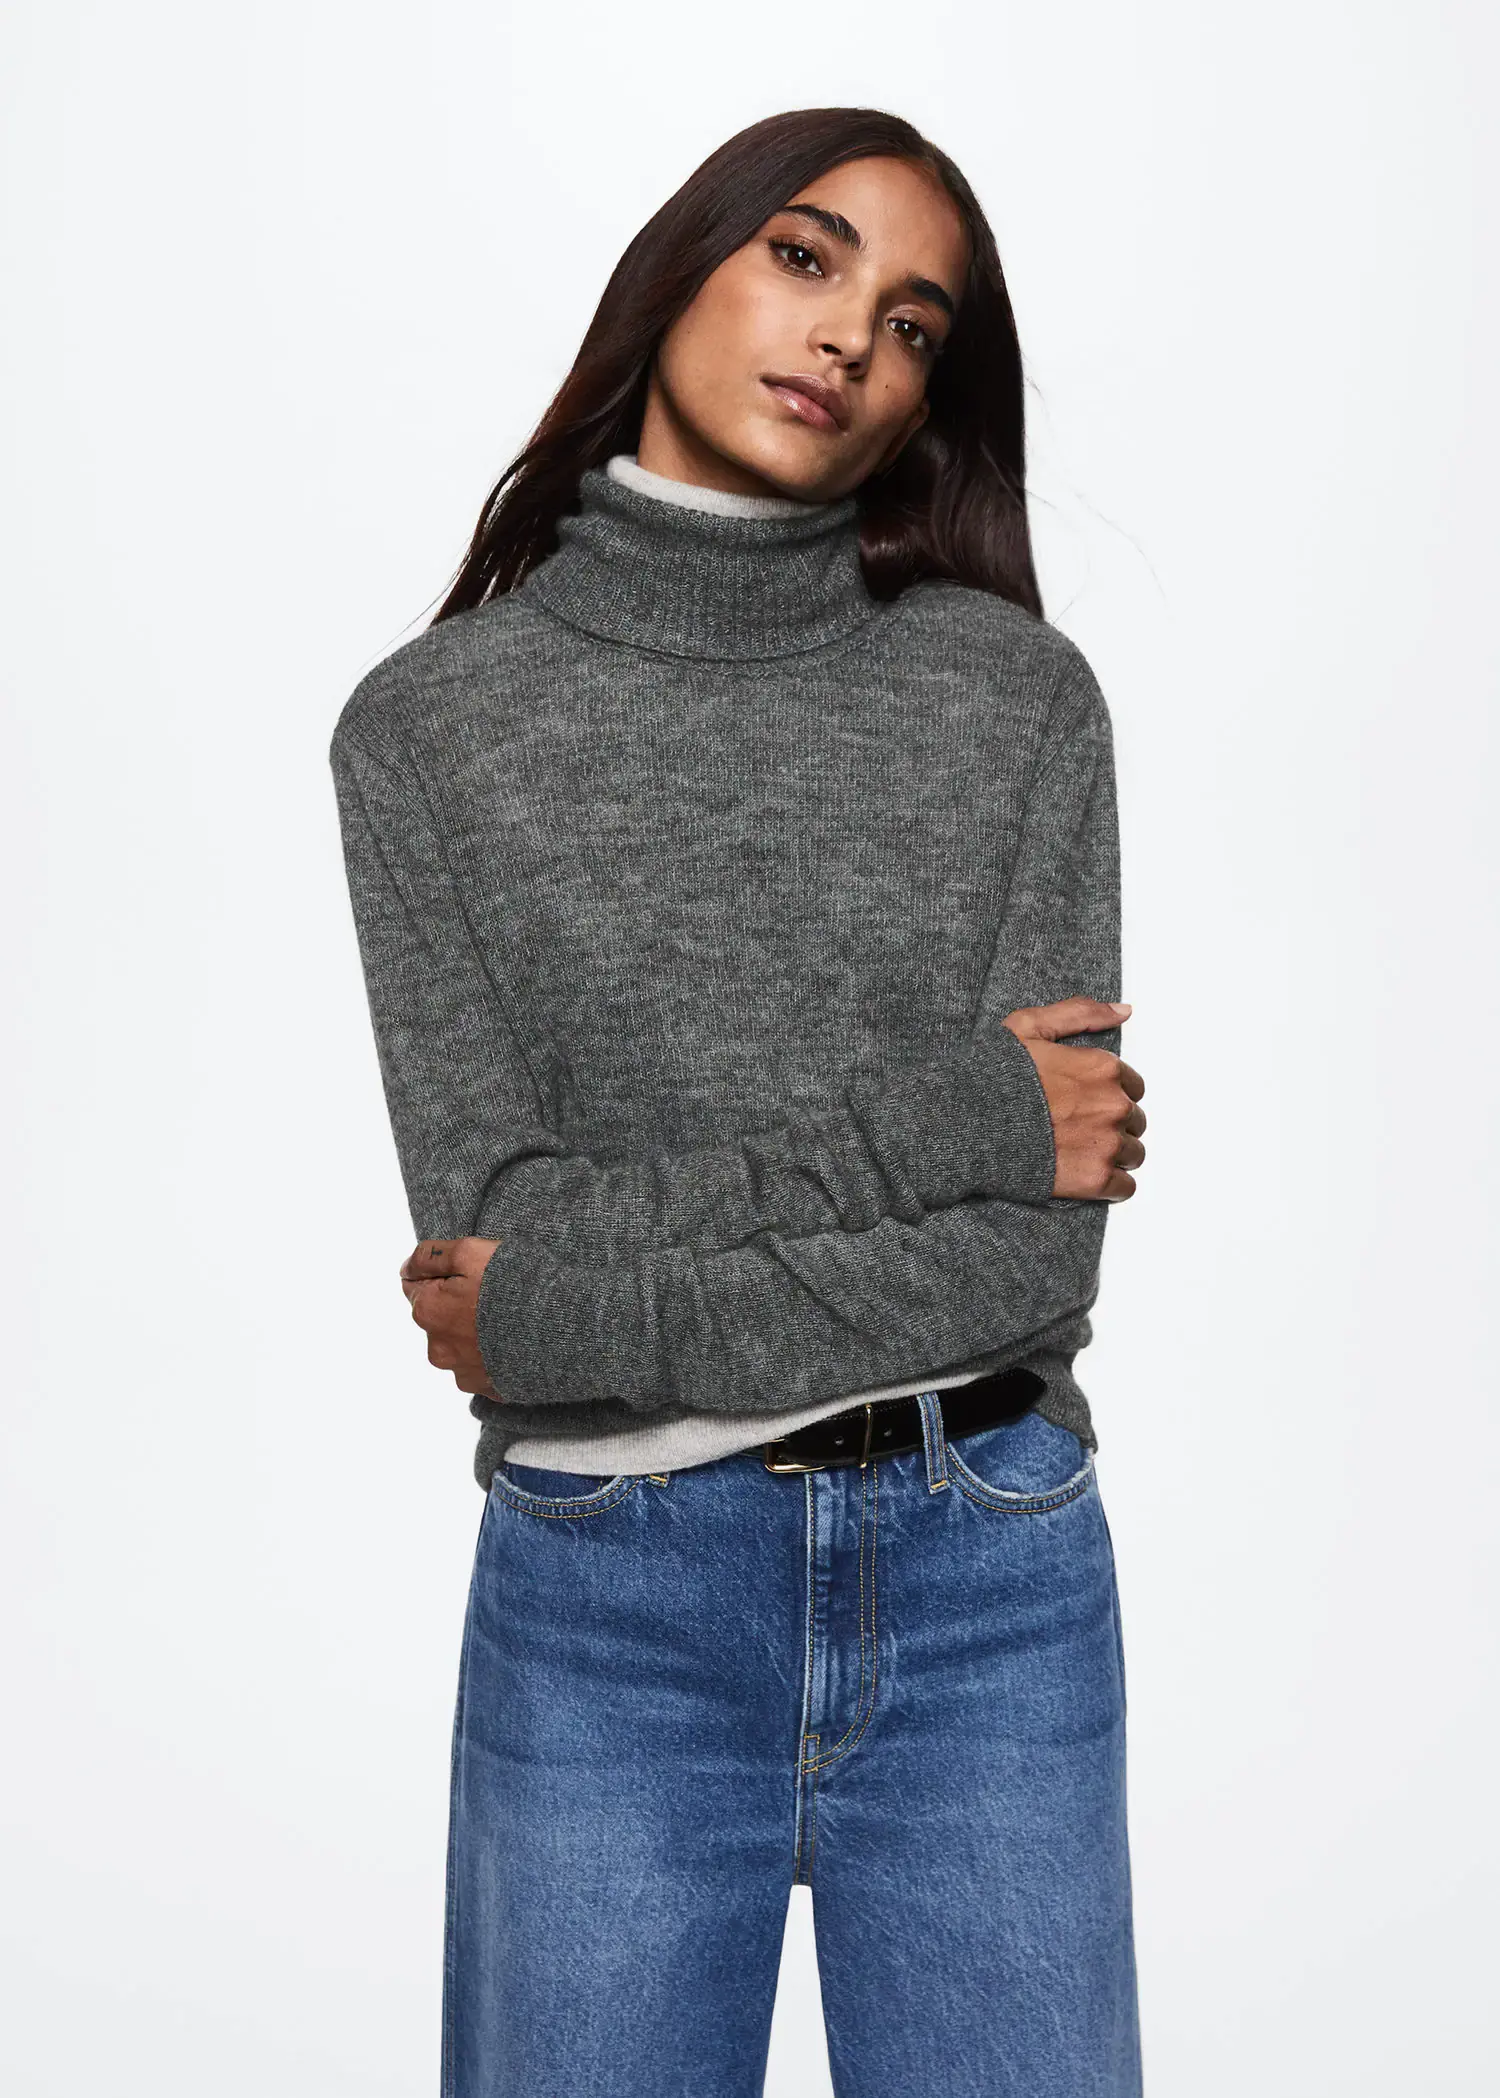 Mango Turtle neck sweater. a woman wearing a gray sweater and blue jeans. 